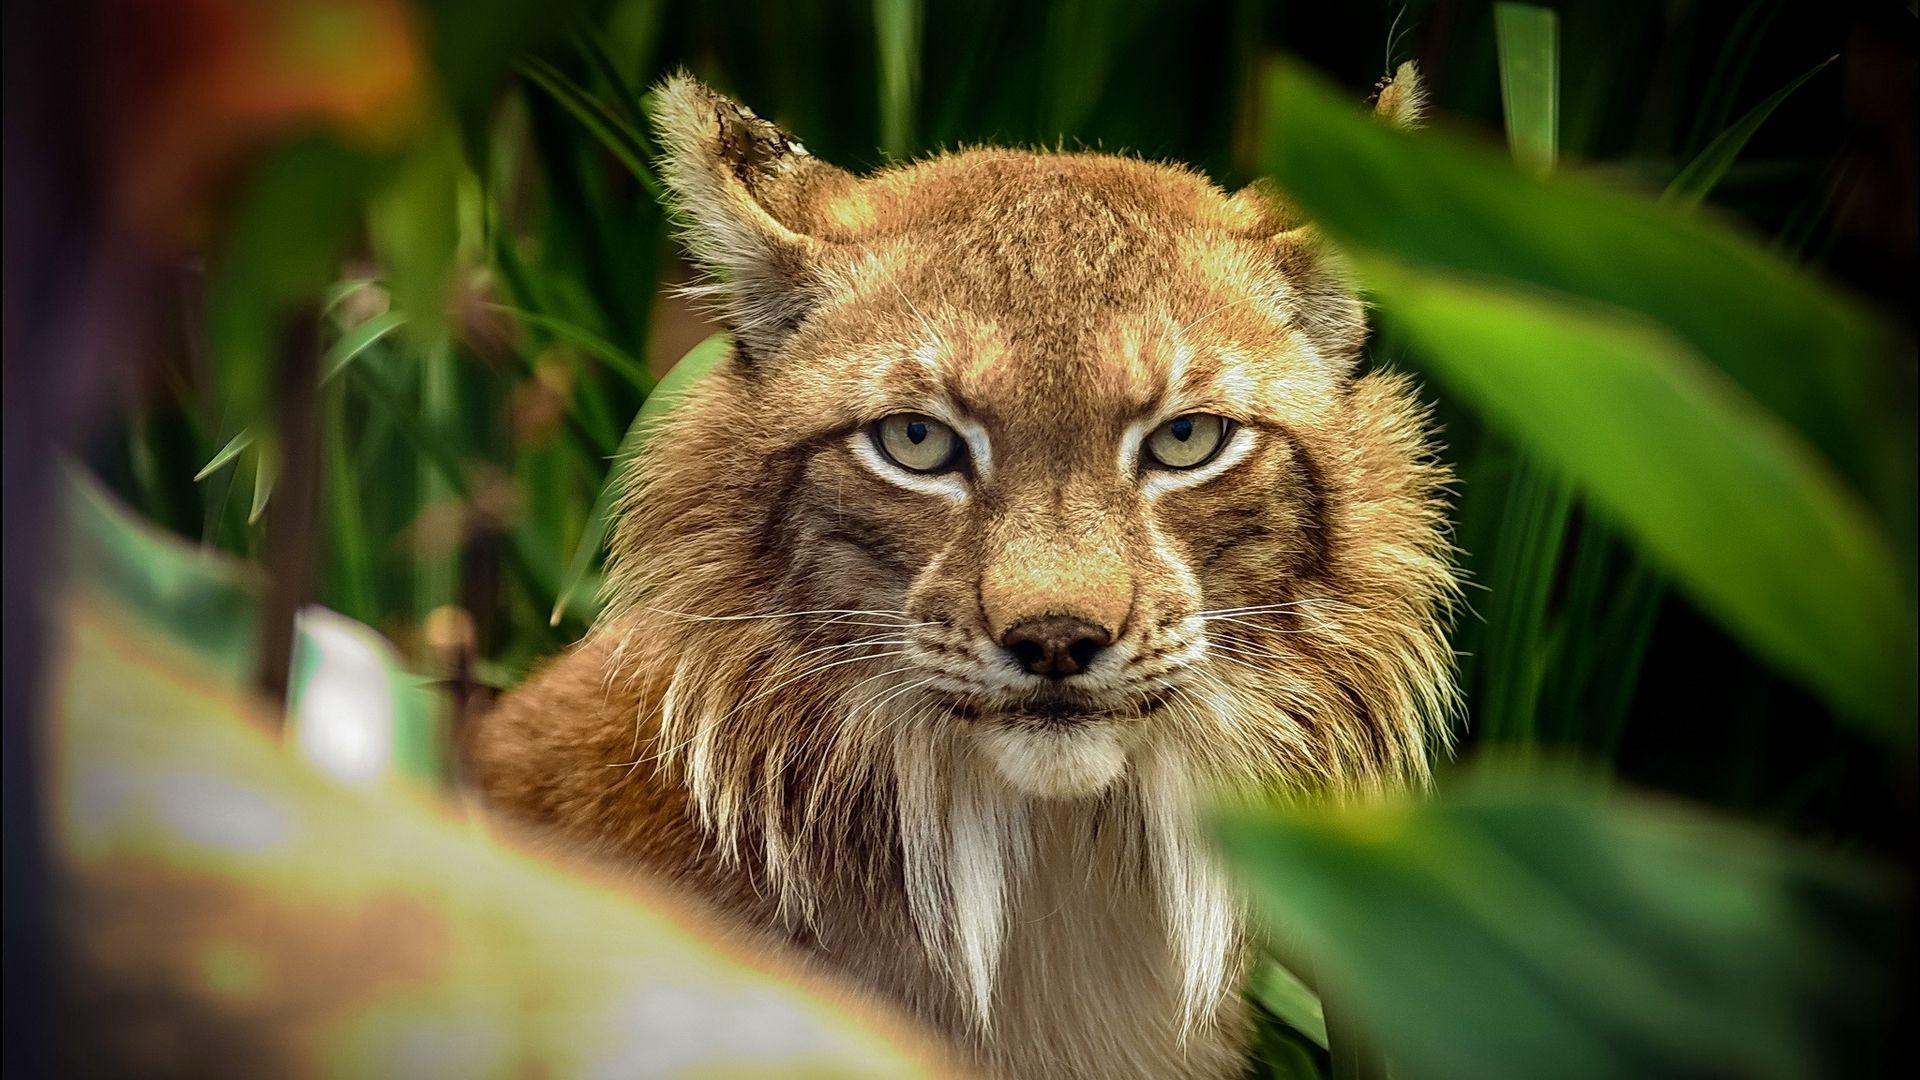 Bobcat image, picture, background